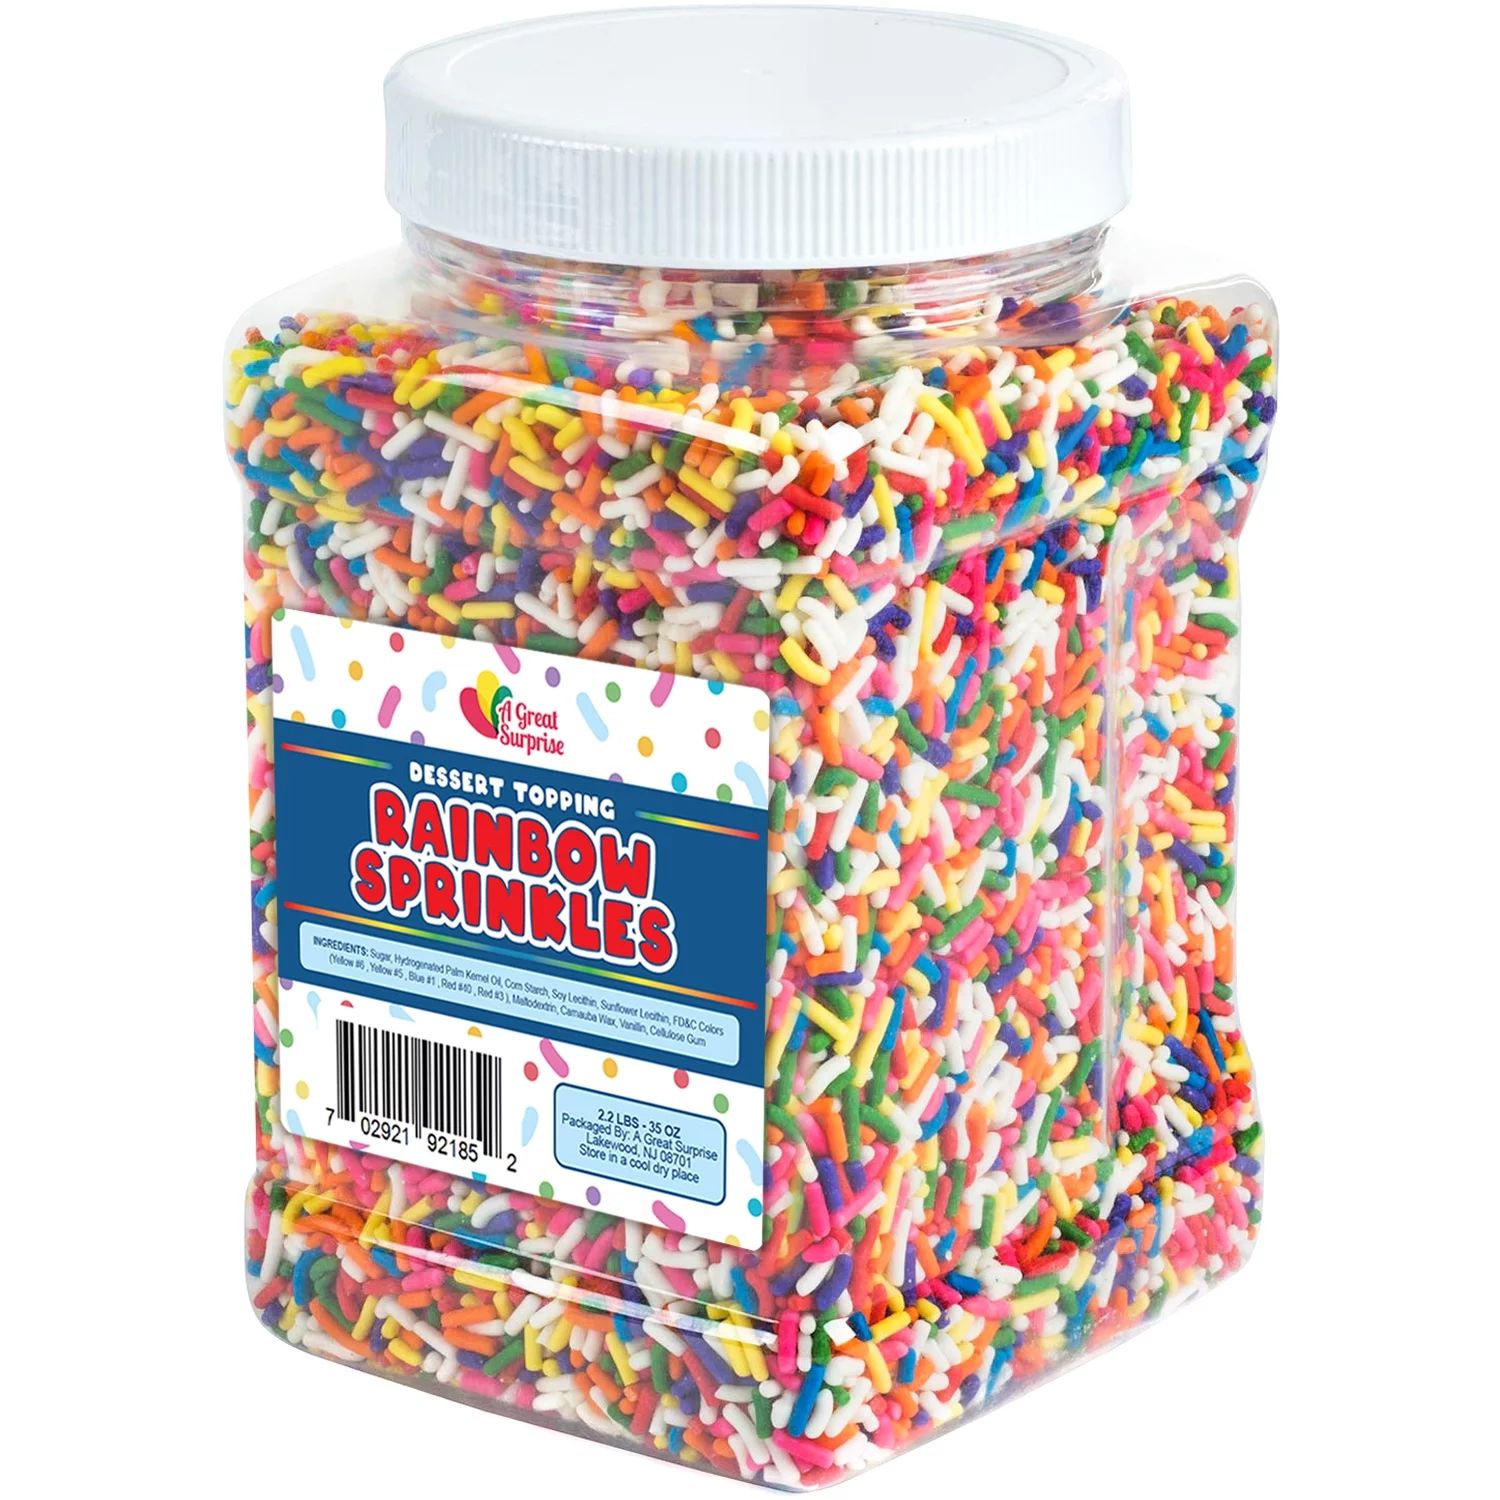 Rainbow Sprinkles Bulk - 2.2 Pounds - Sprinkle Candy - Decorating Jimmies - Resealable Container | Walmart (US)